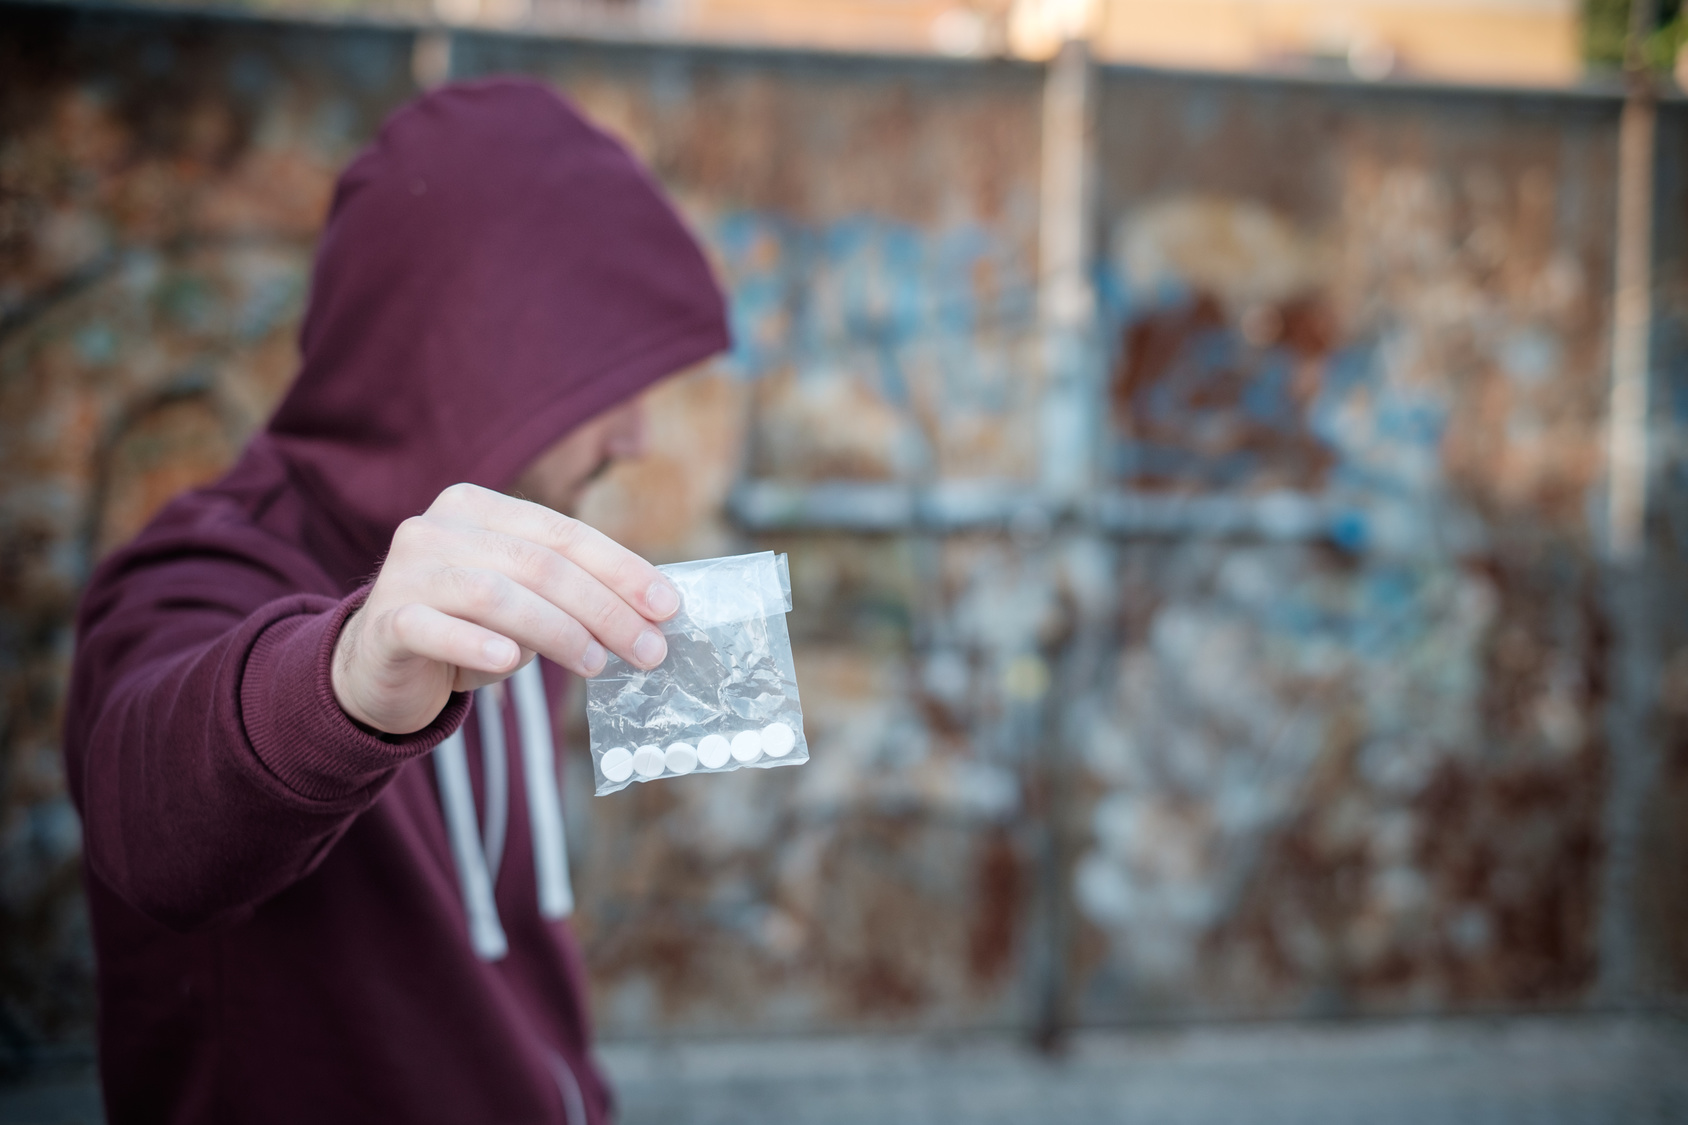 A man in a red hoodie sells some drugs. He's white.